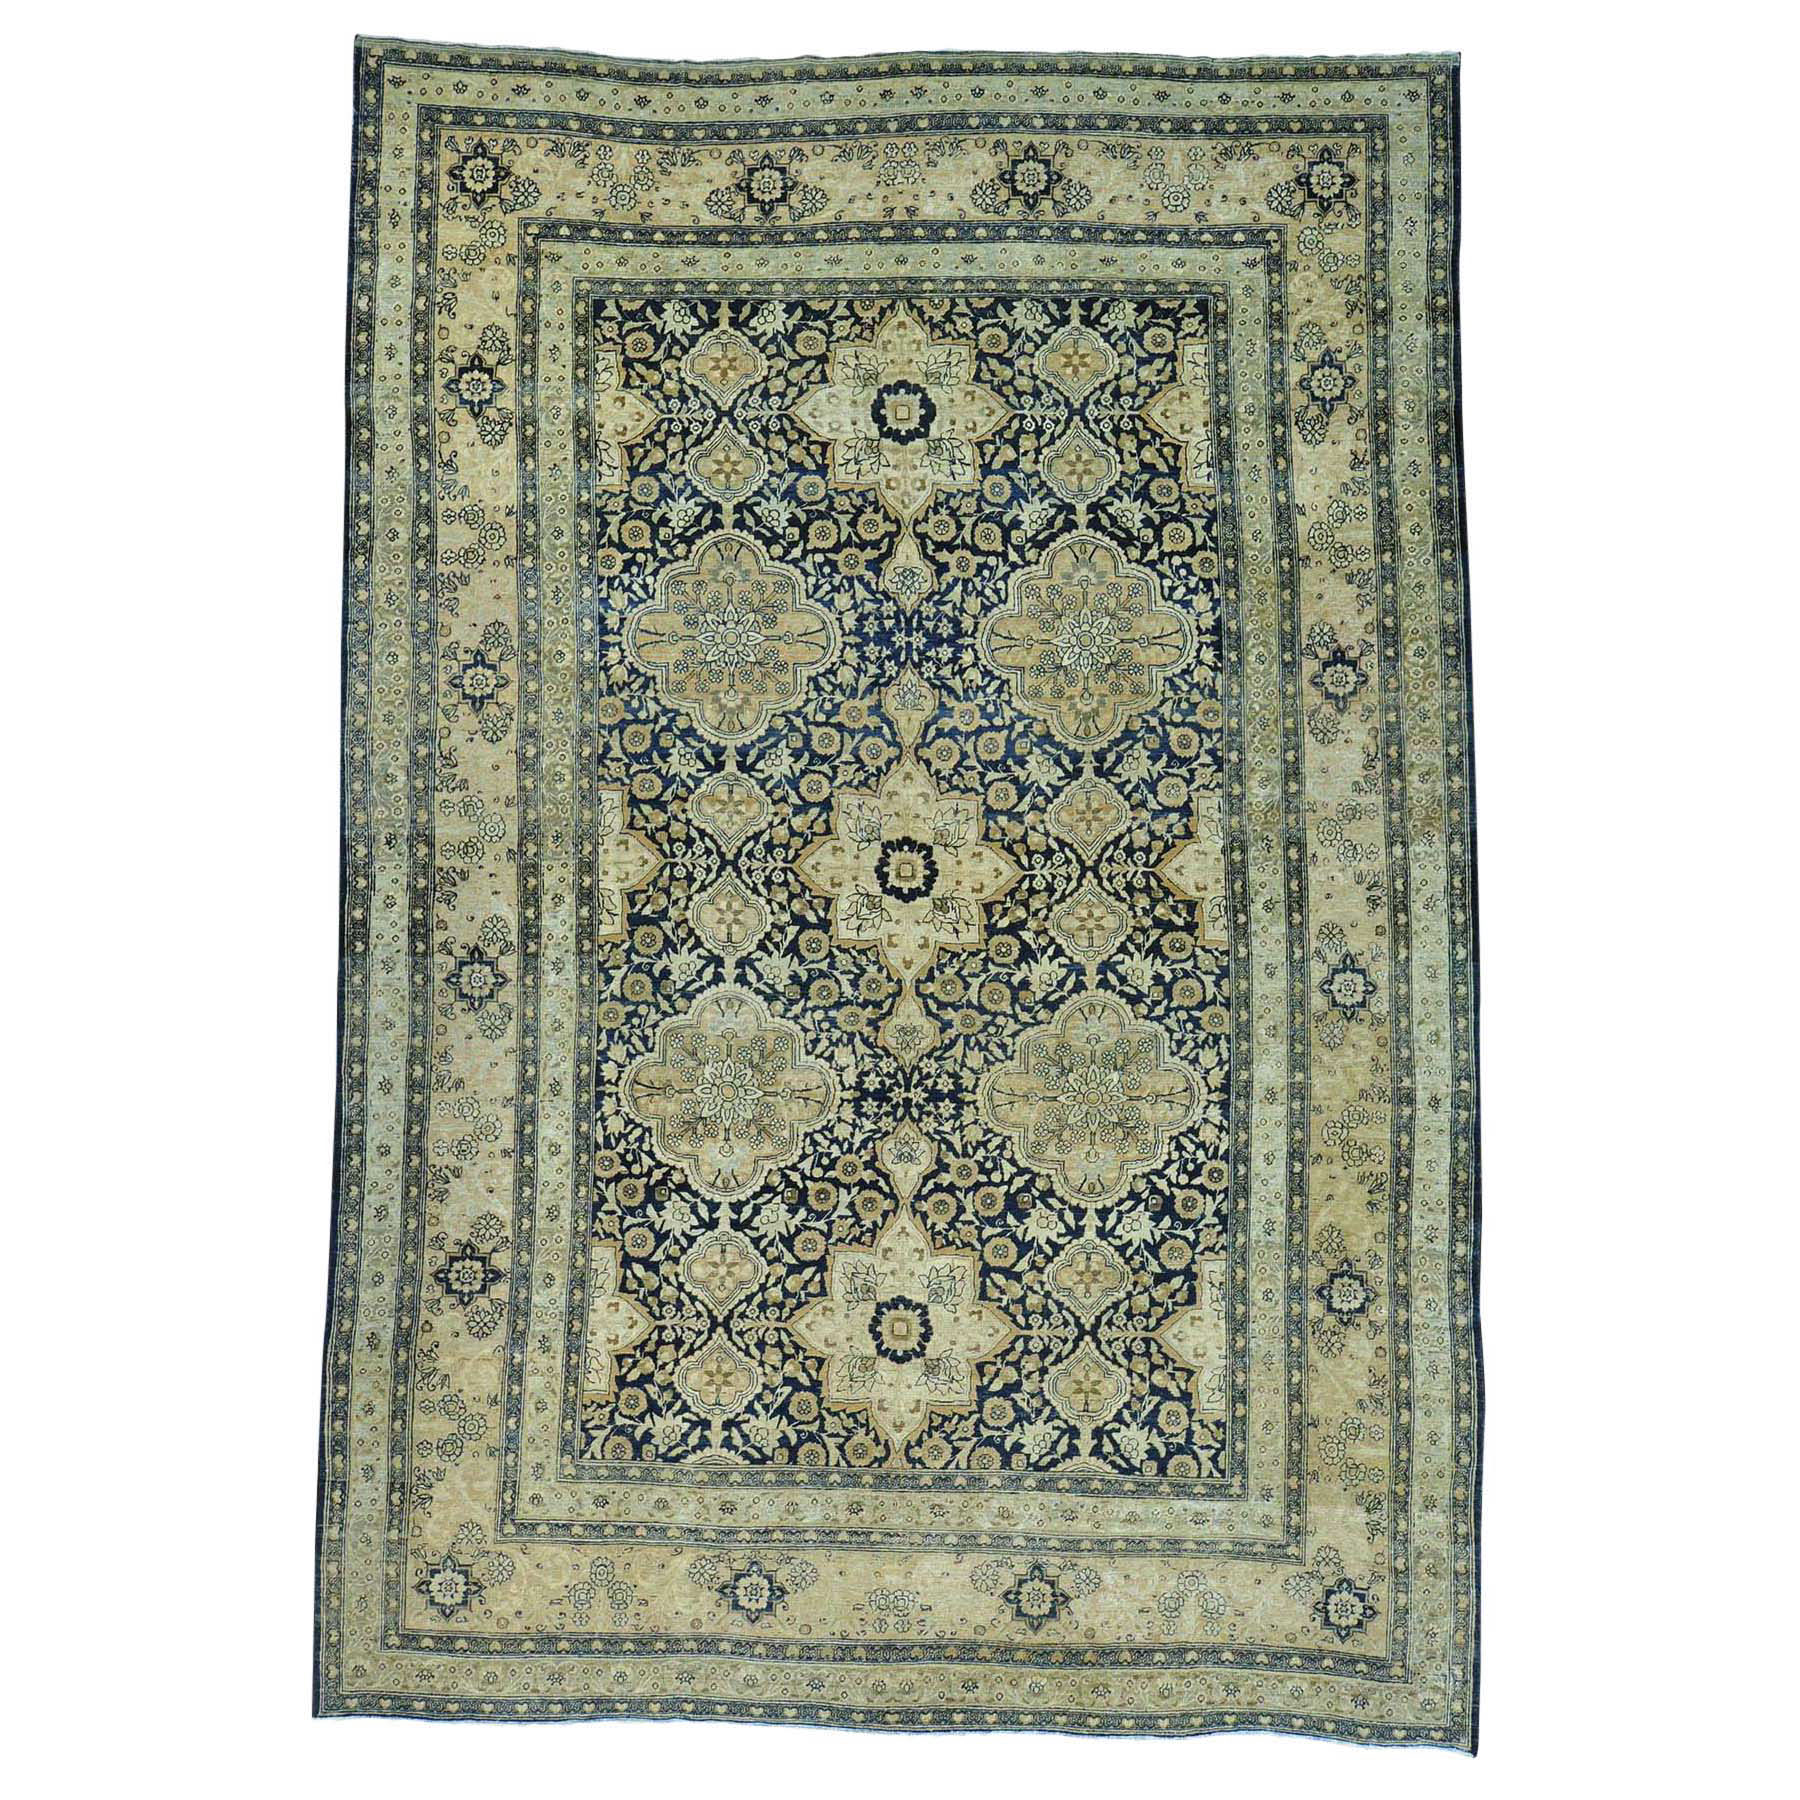 Traditional Wool Hand-Woven Area Rug 9'5